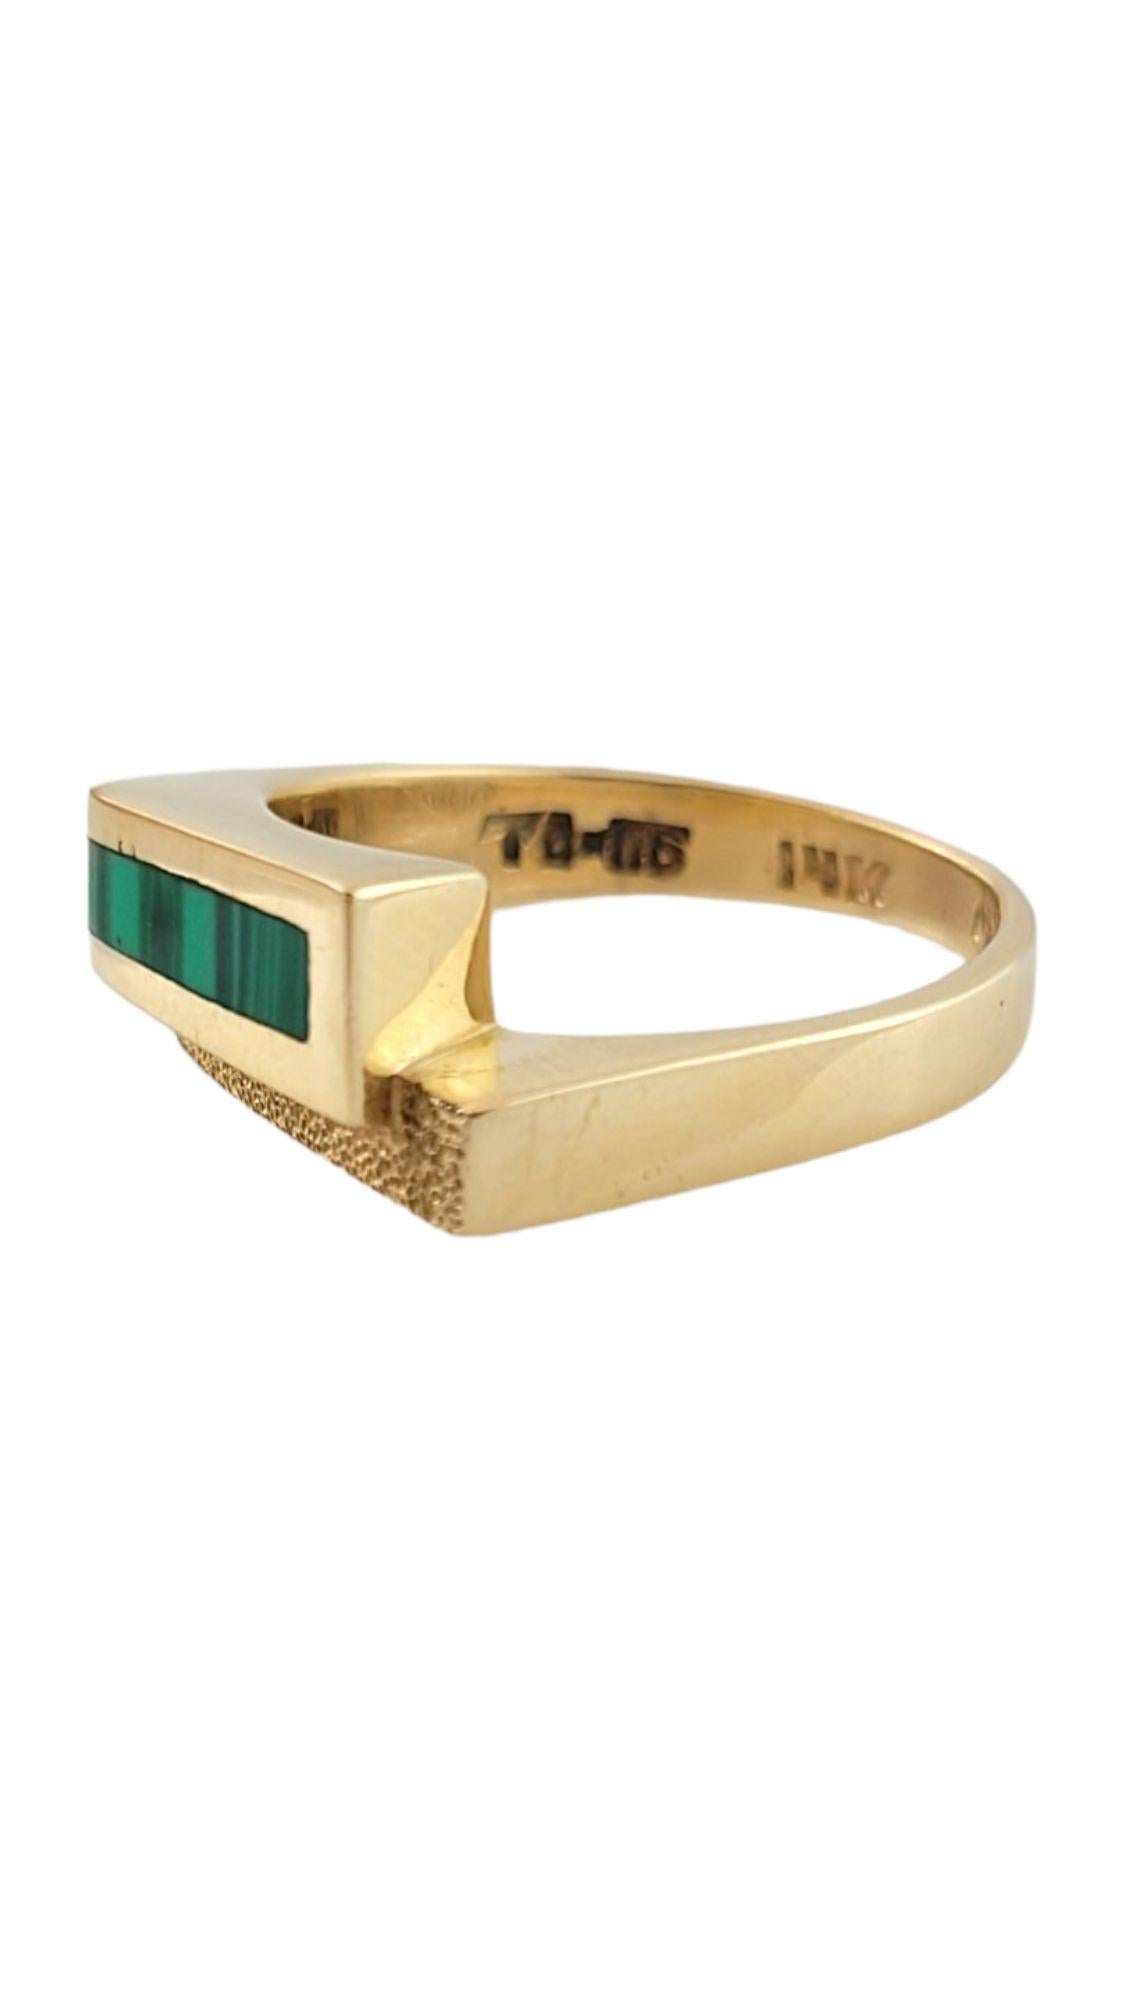 Square Cut 14K Yellow Gold Malachite Taxco Ring Size 6.75 #14987 For Sale